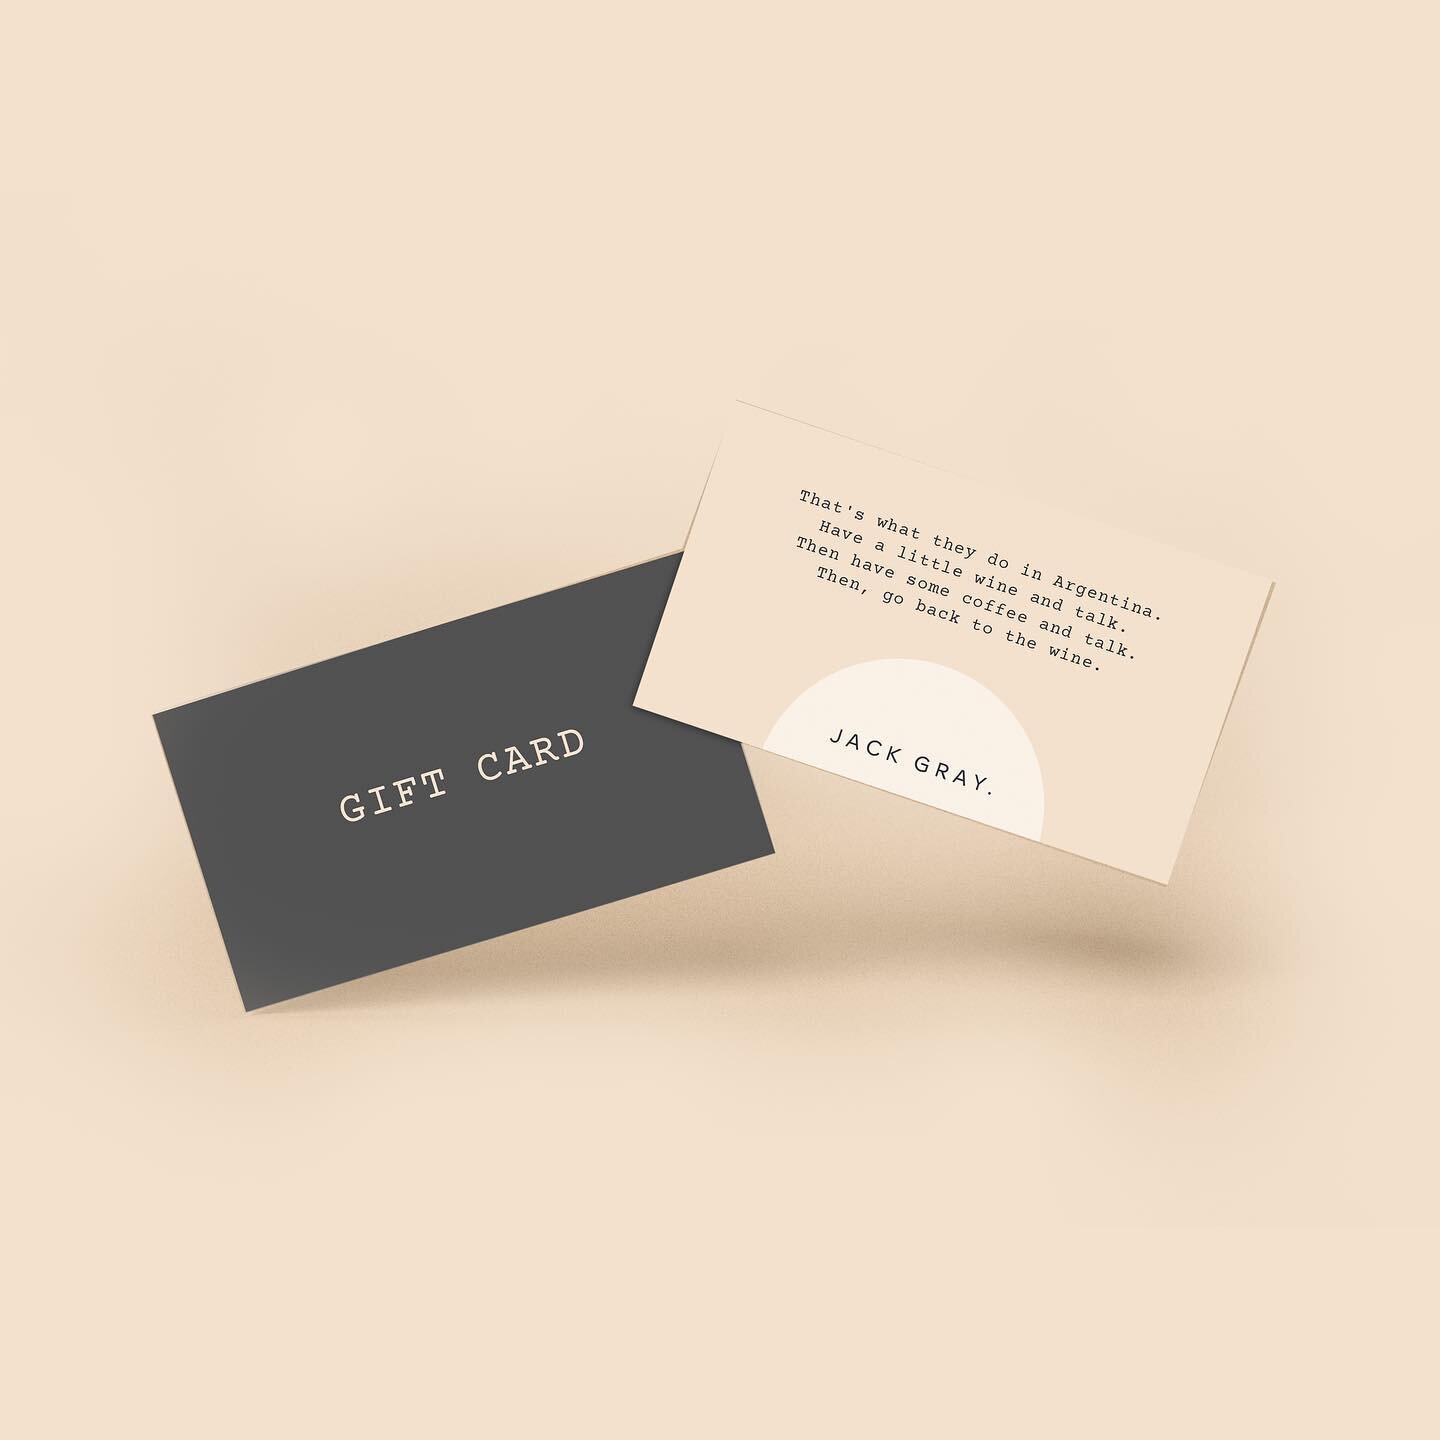 When a client asks for gift cards and we find this quote from Grace Jones.  @jack.gray.cafe 

These pretty cards available in-store or swipe to see our e-card designs available online at jackgray.com.au 🎁